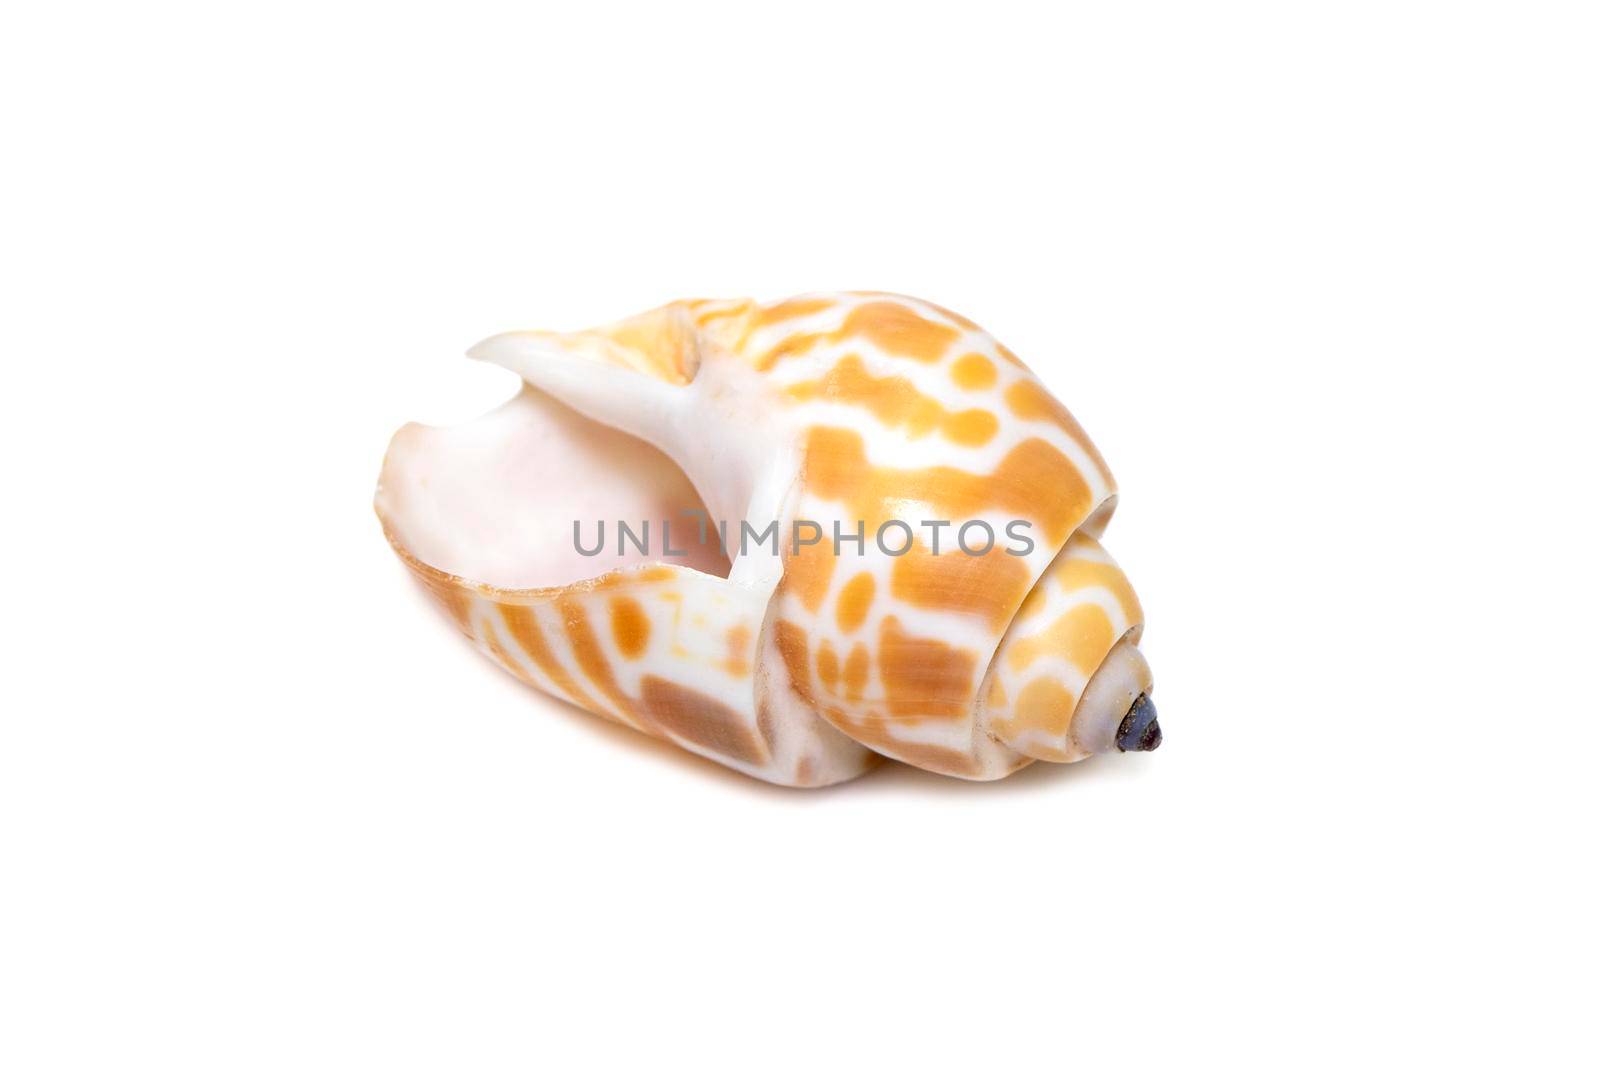 Image of babylonia spirata, common name the Spiral Babylon, is a species of sea snail, a marine gastropod mollusk, in the family Babyloniidae isolated on white background. Sea snail. Undersea Animals. Sea Shells.